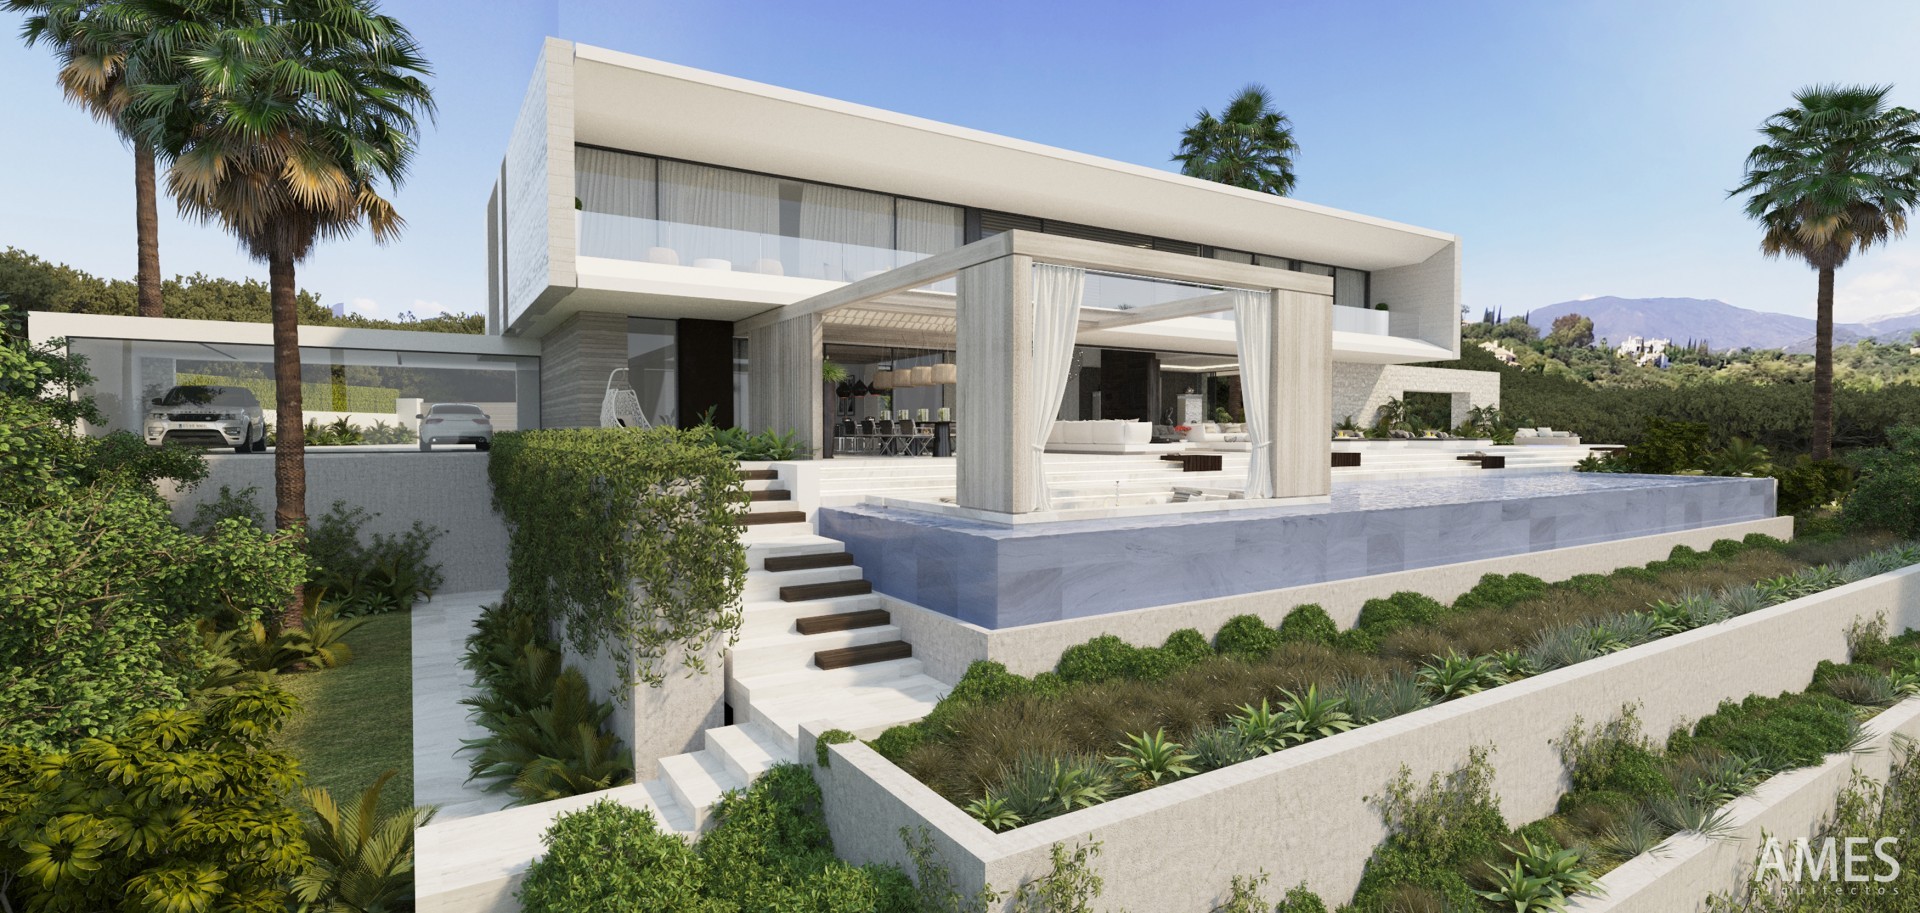 Qlistings - Brand new architectural masterpiece located in El Madroñal Property Image